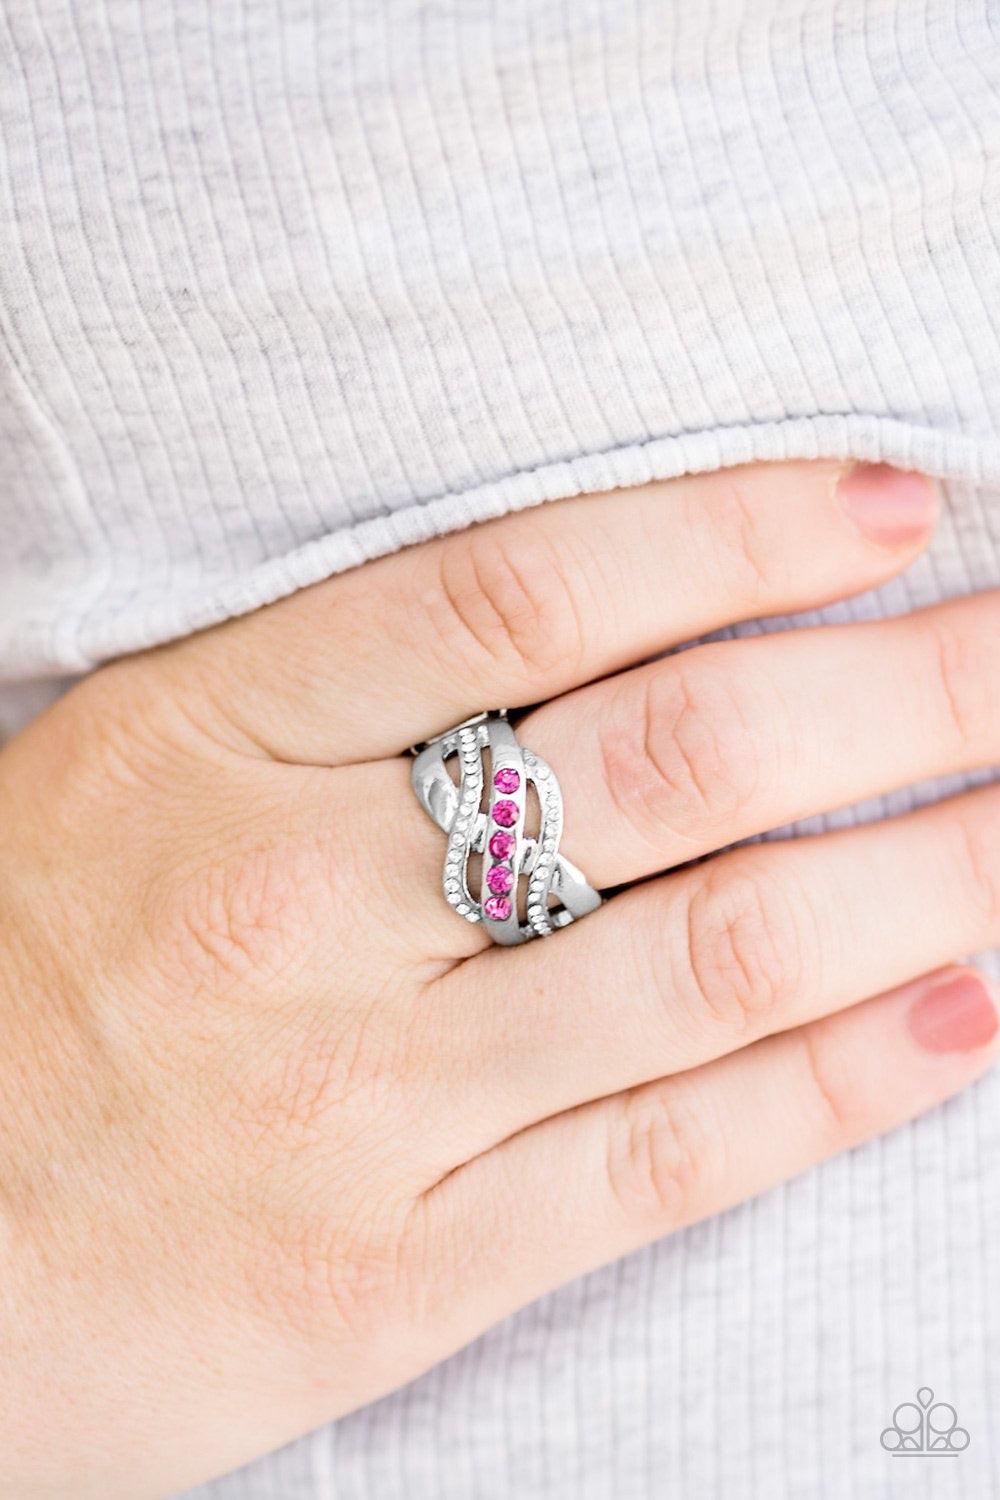 Paparazzi Accessories Flirting With Sparkle - Pink Shimmery silver bars swoop across the finger, creating an airy band. Complemented with dainty white rhinestones, the centermost silver band is encrusted in glittery pink rhinestones for a flirtatious fini